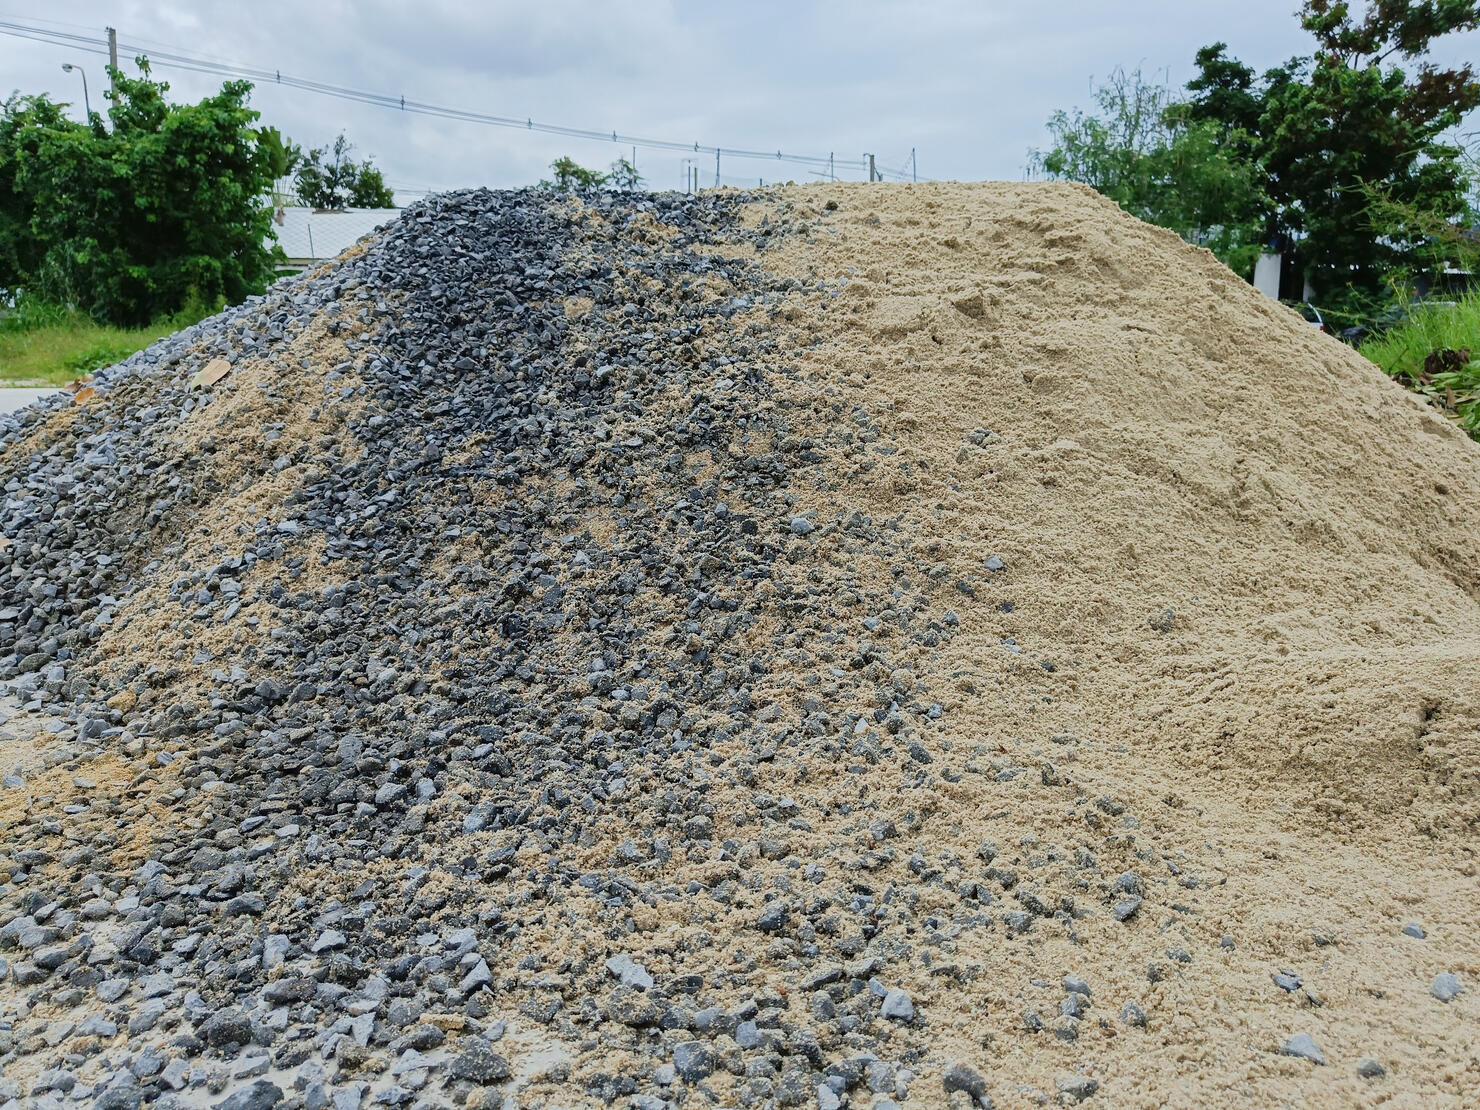 Pile of gravel or stone and sand for construction